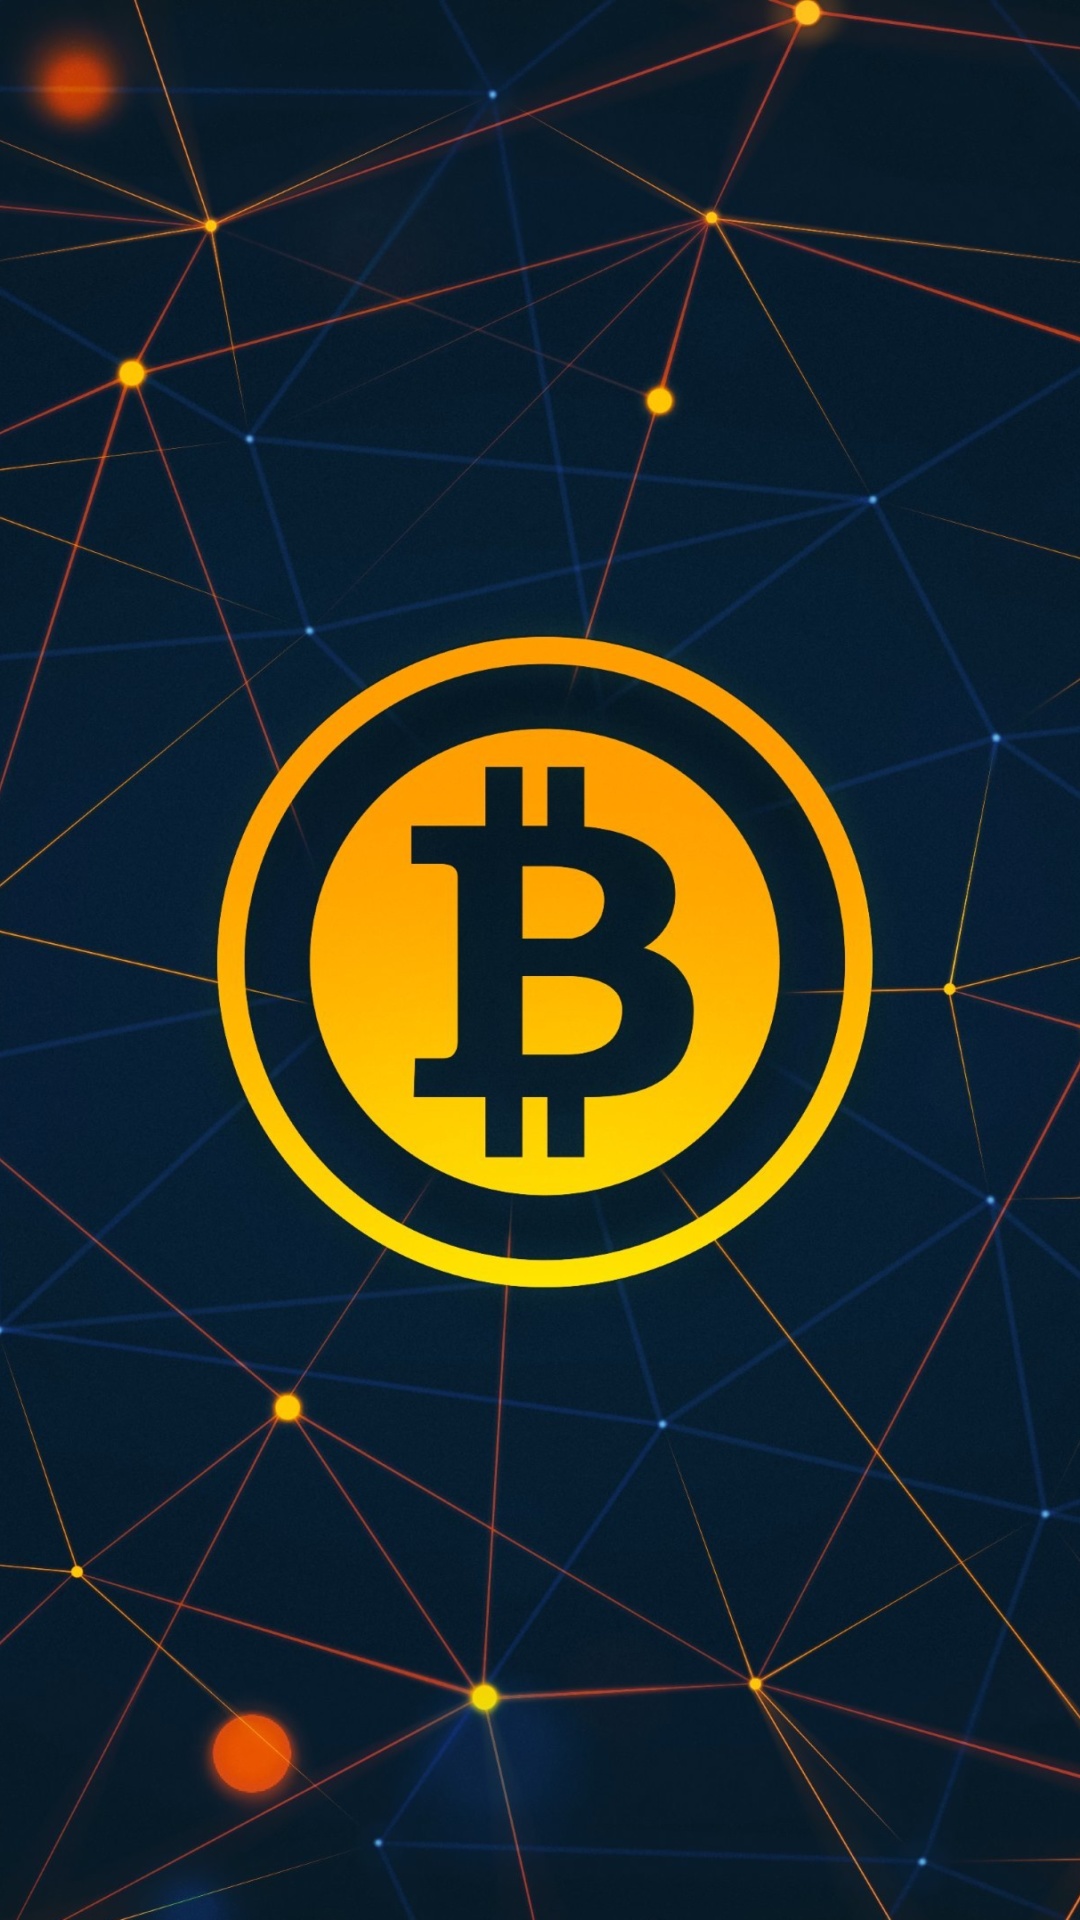 Bitcoin Cryptocurrency wallpaper 1080x1920